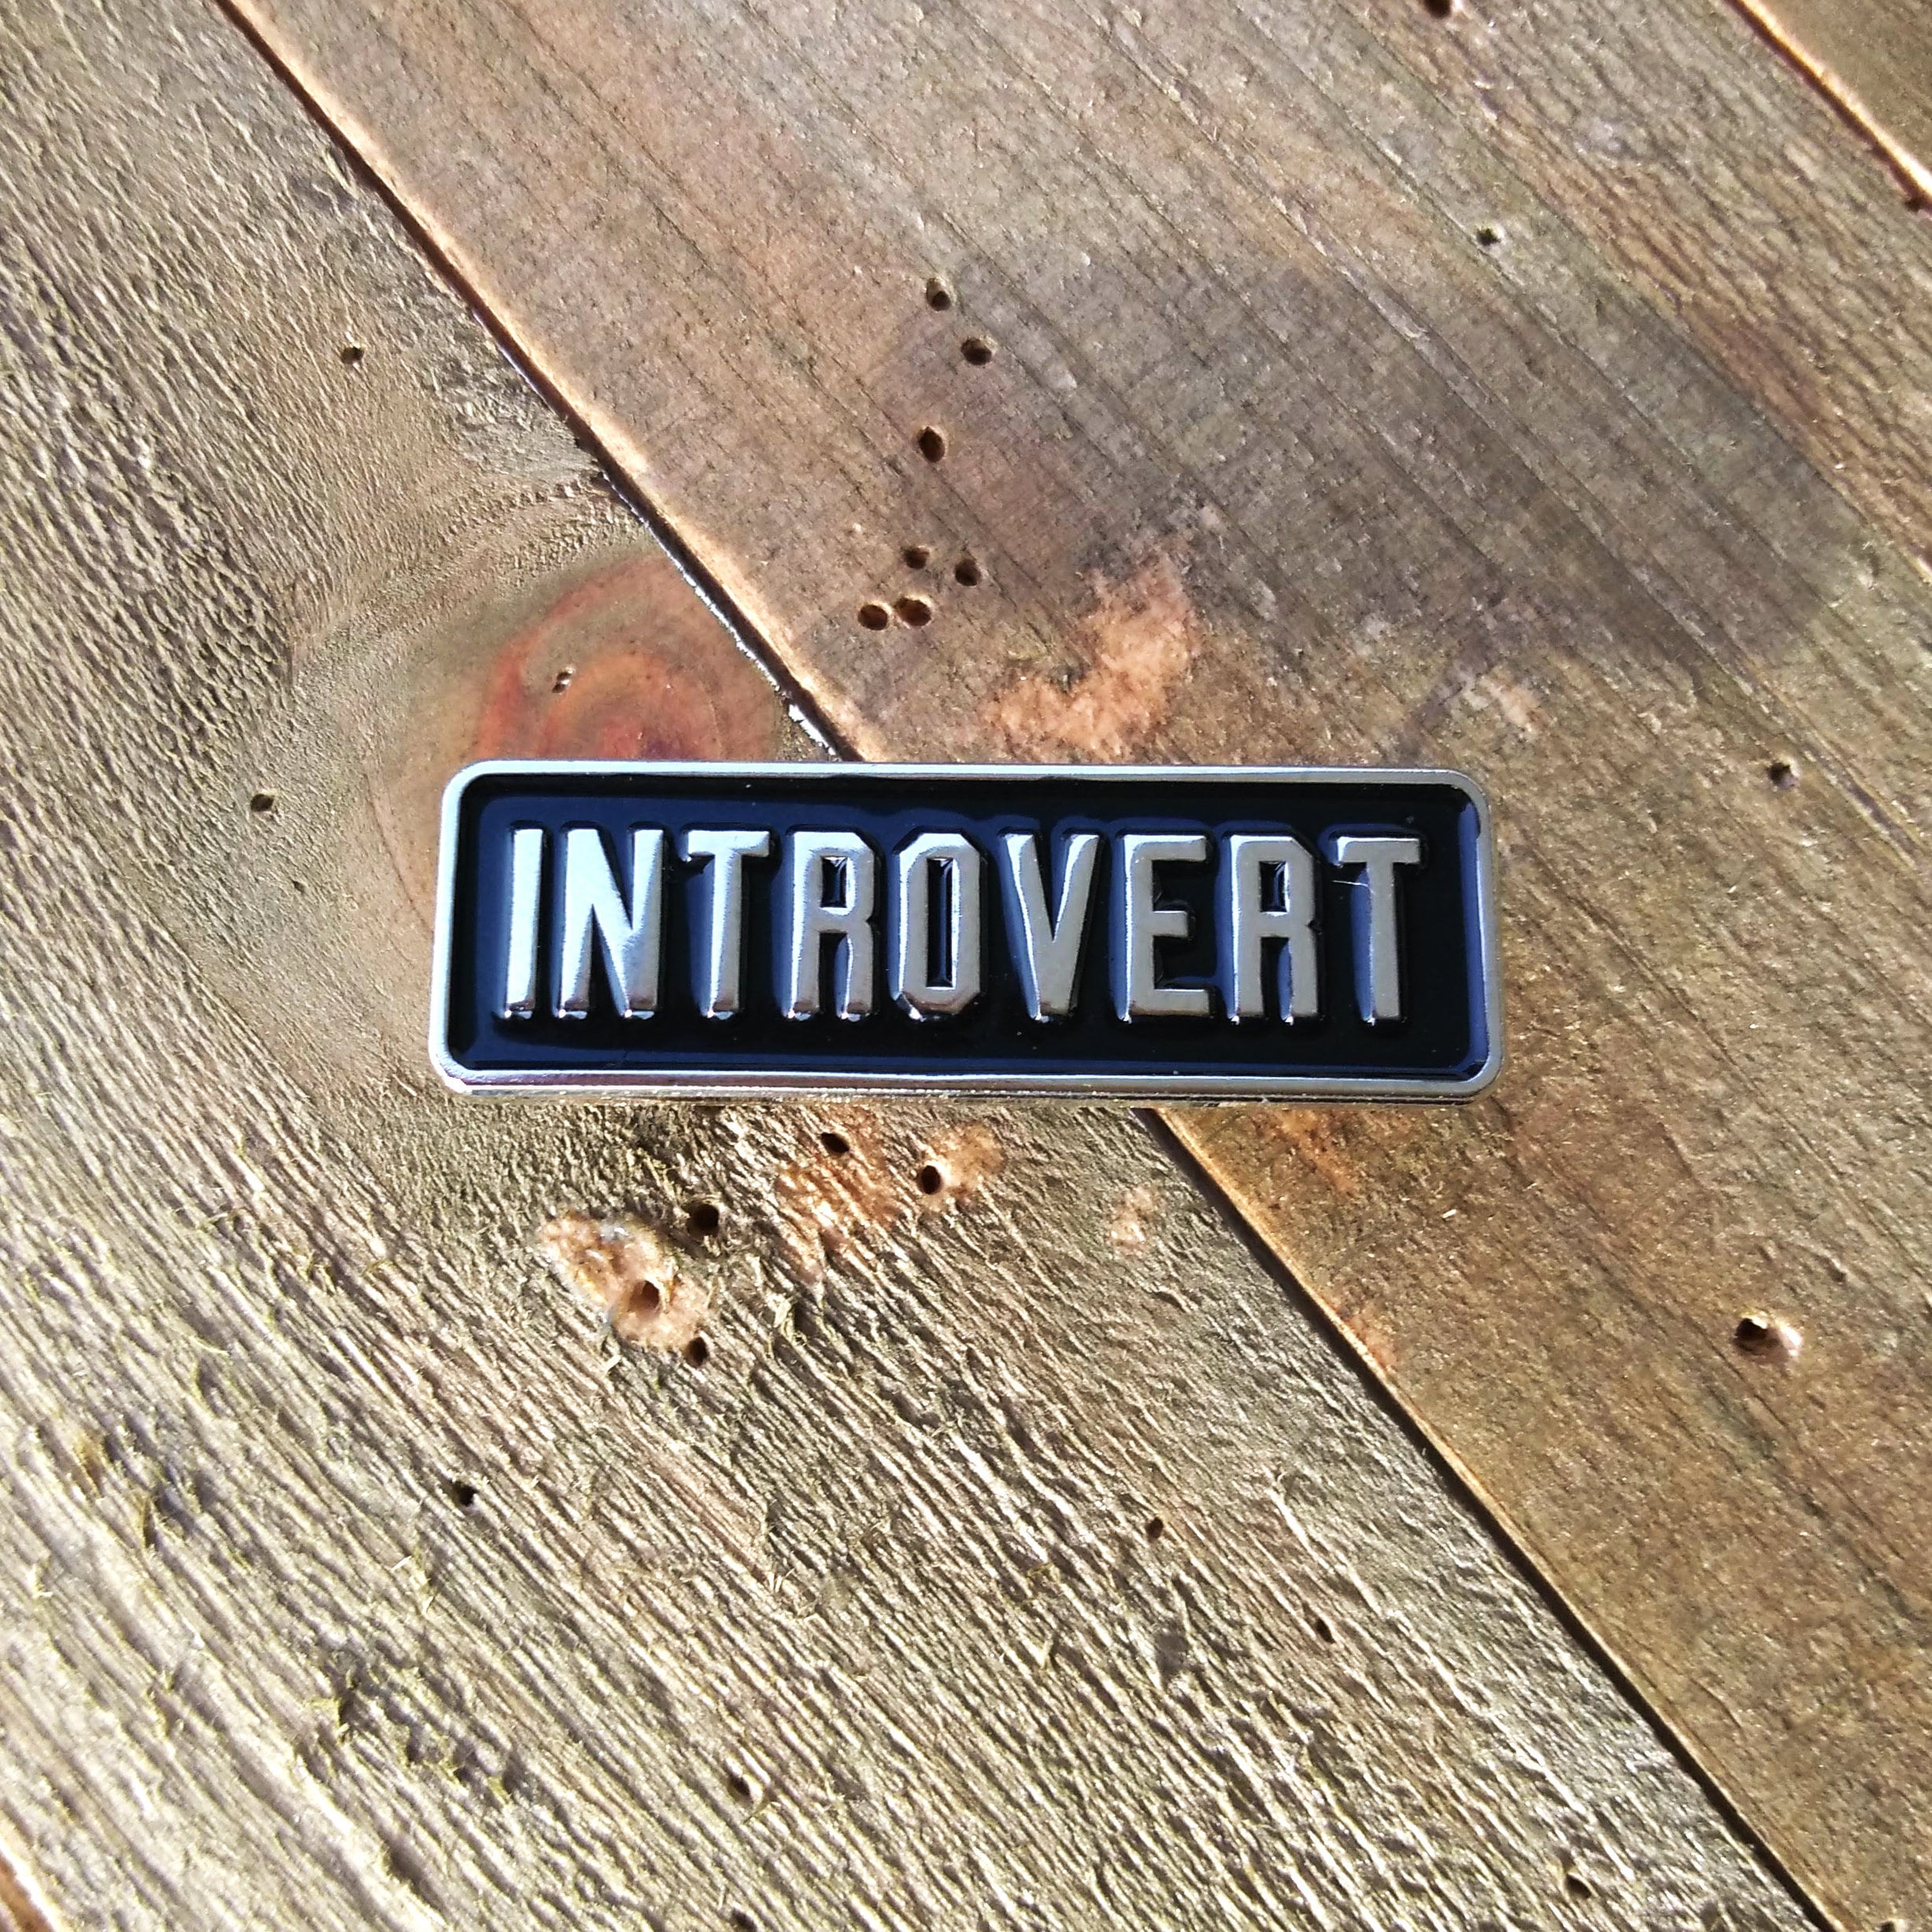 Social Battery Enamel Pin | Aesthetic Mood Brooch for Introverts